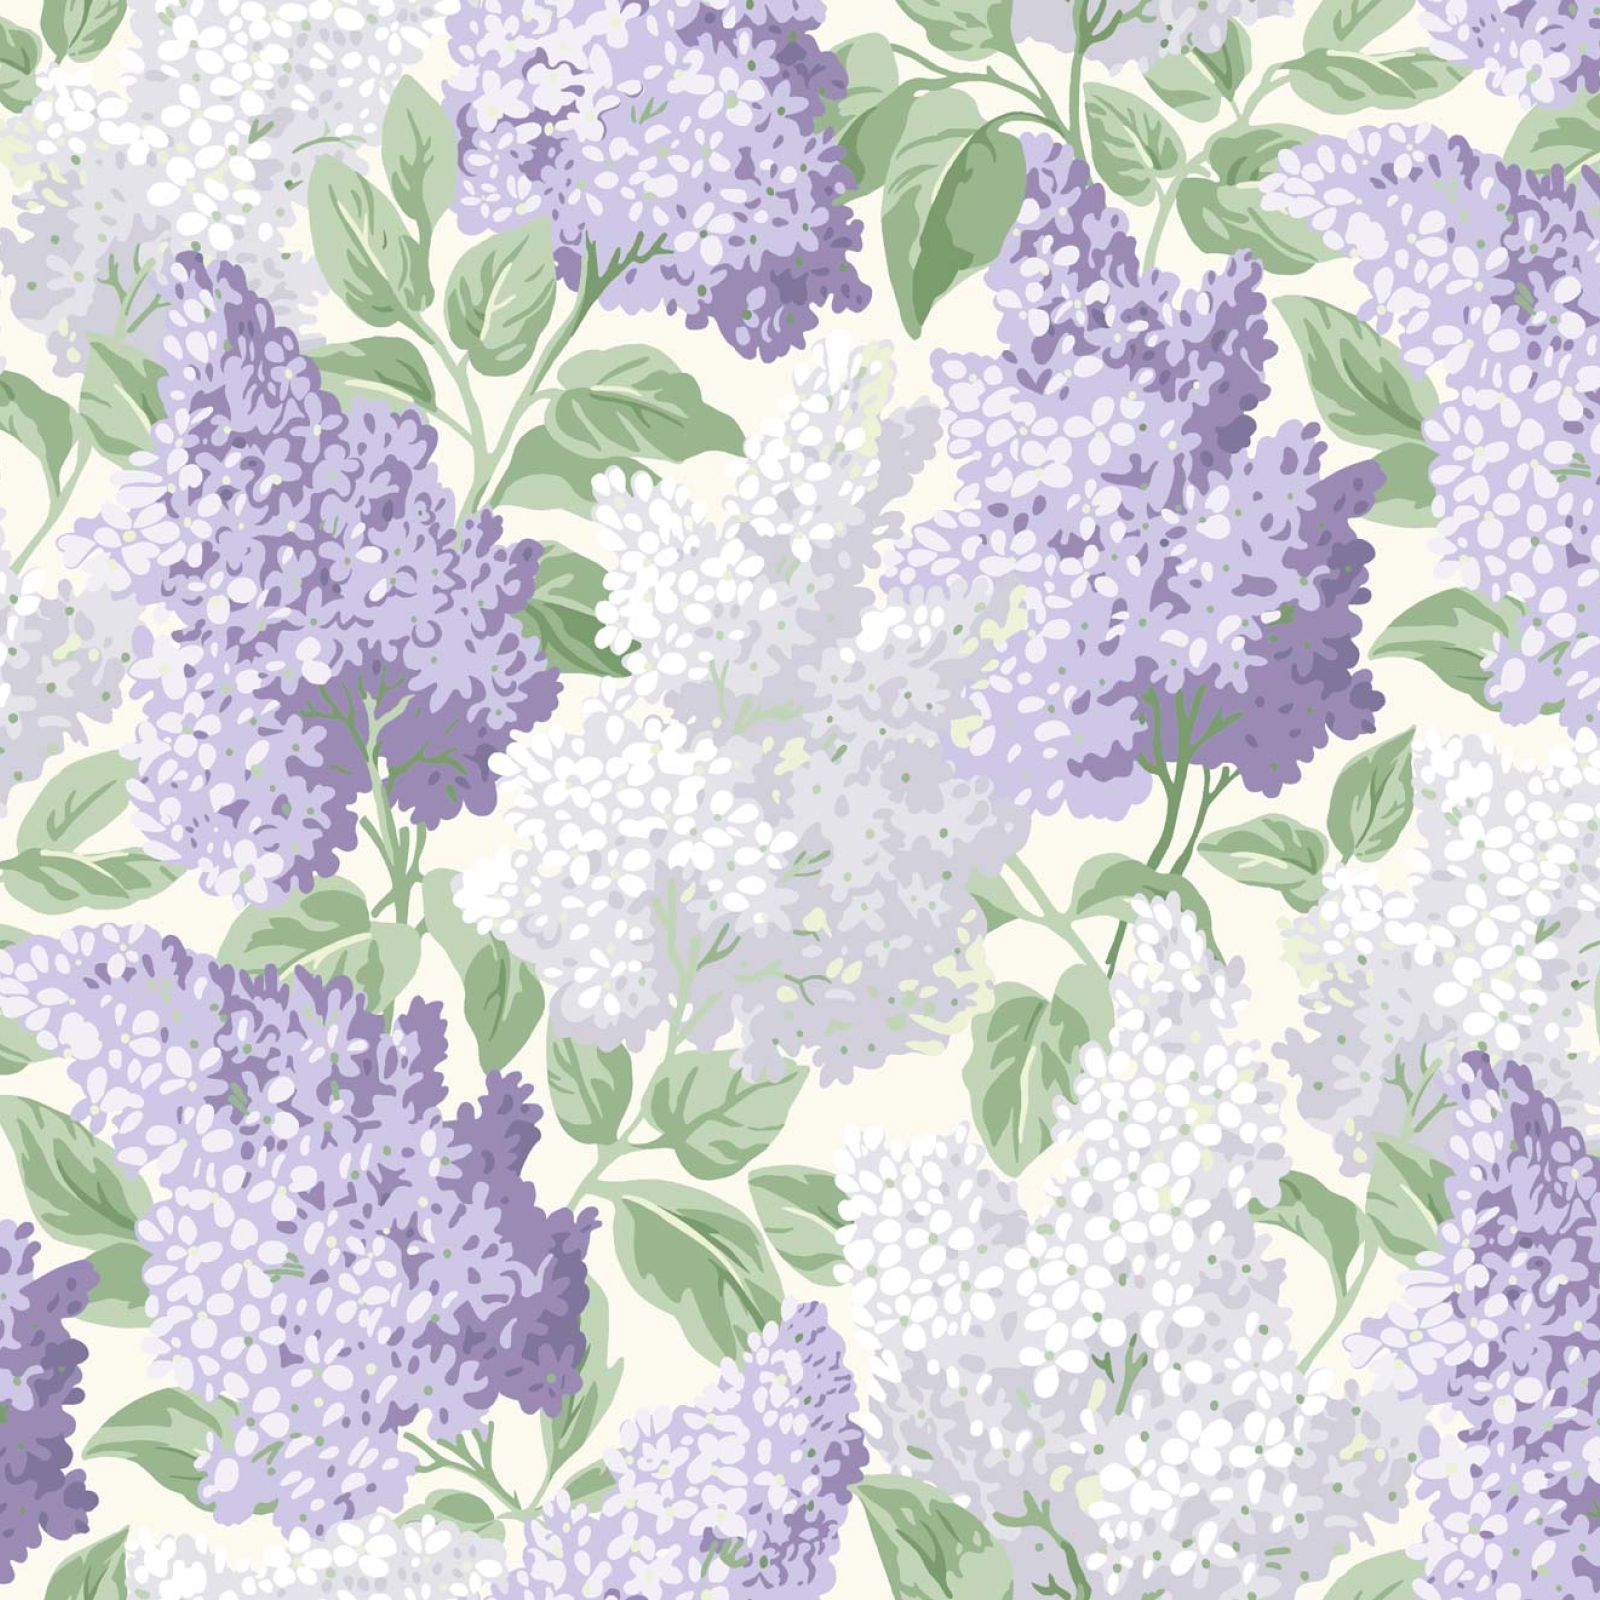 Lilac wallpaper in a choice of 4 colourways